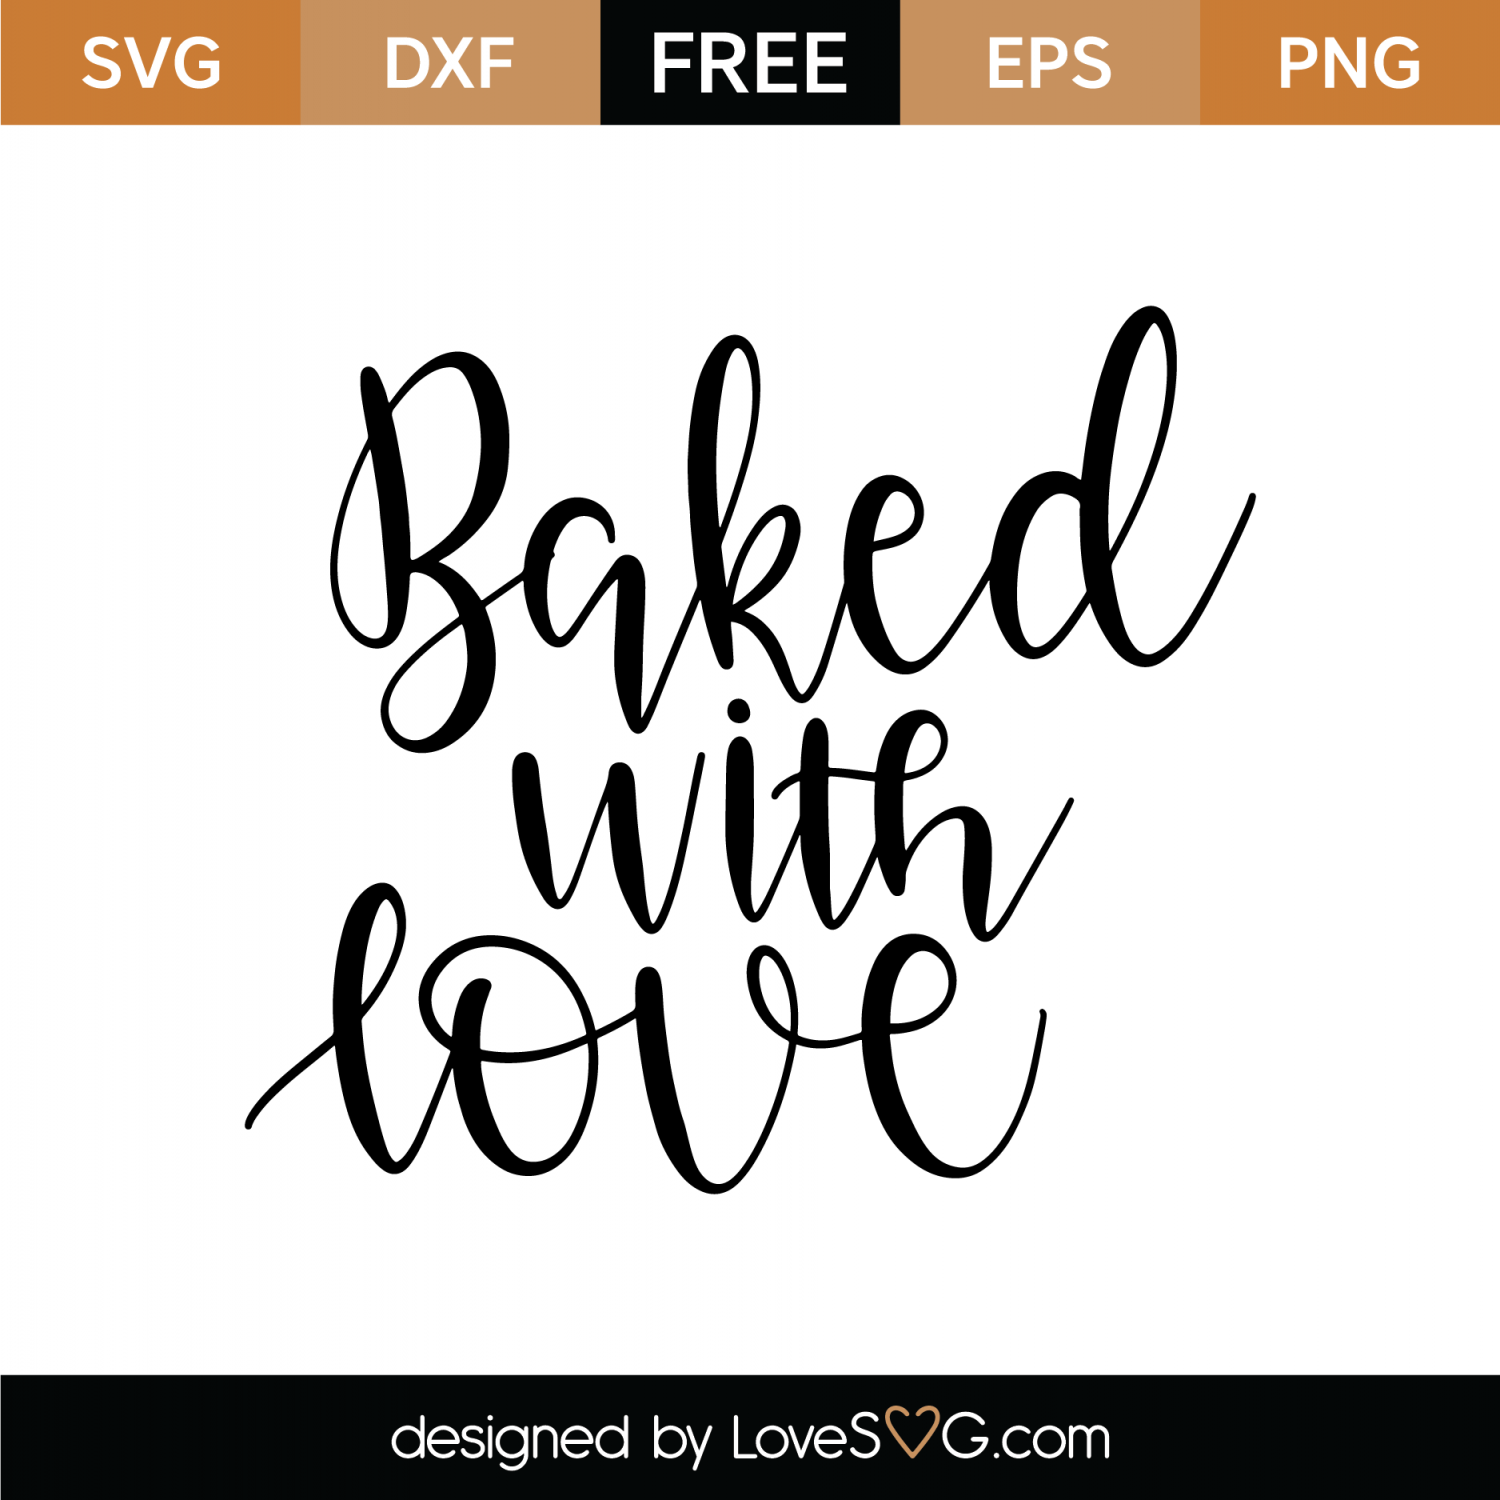 Free Baked With Love Svg Cut File Lovesvg Com